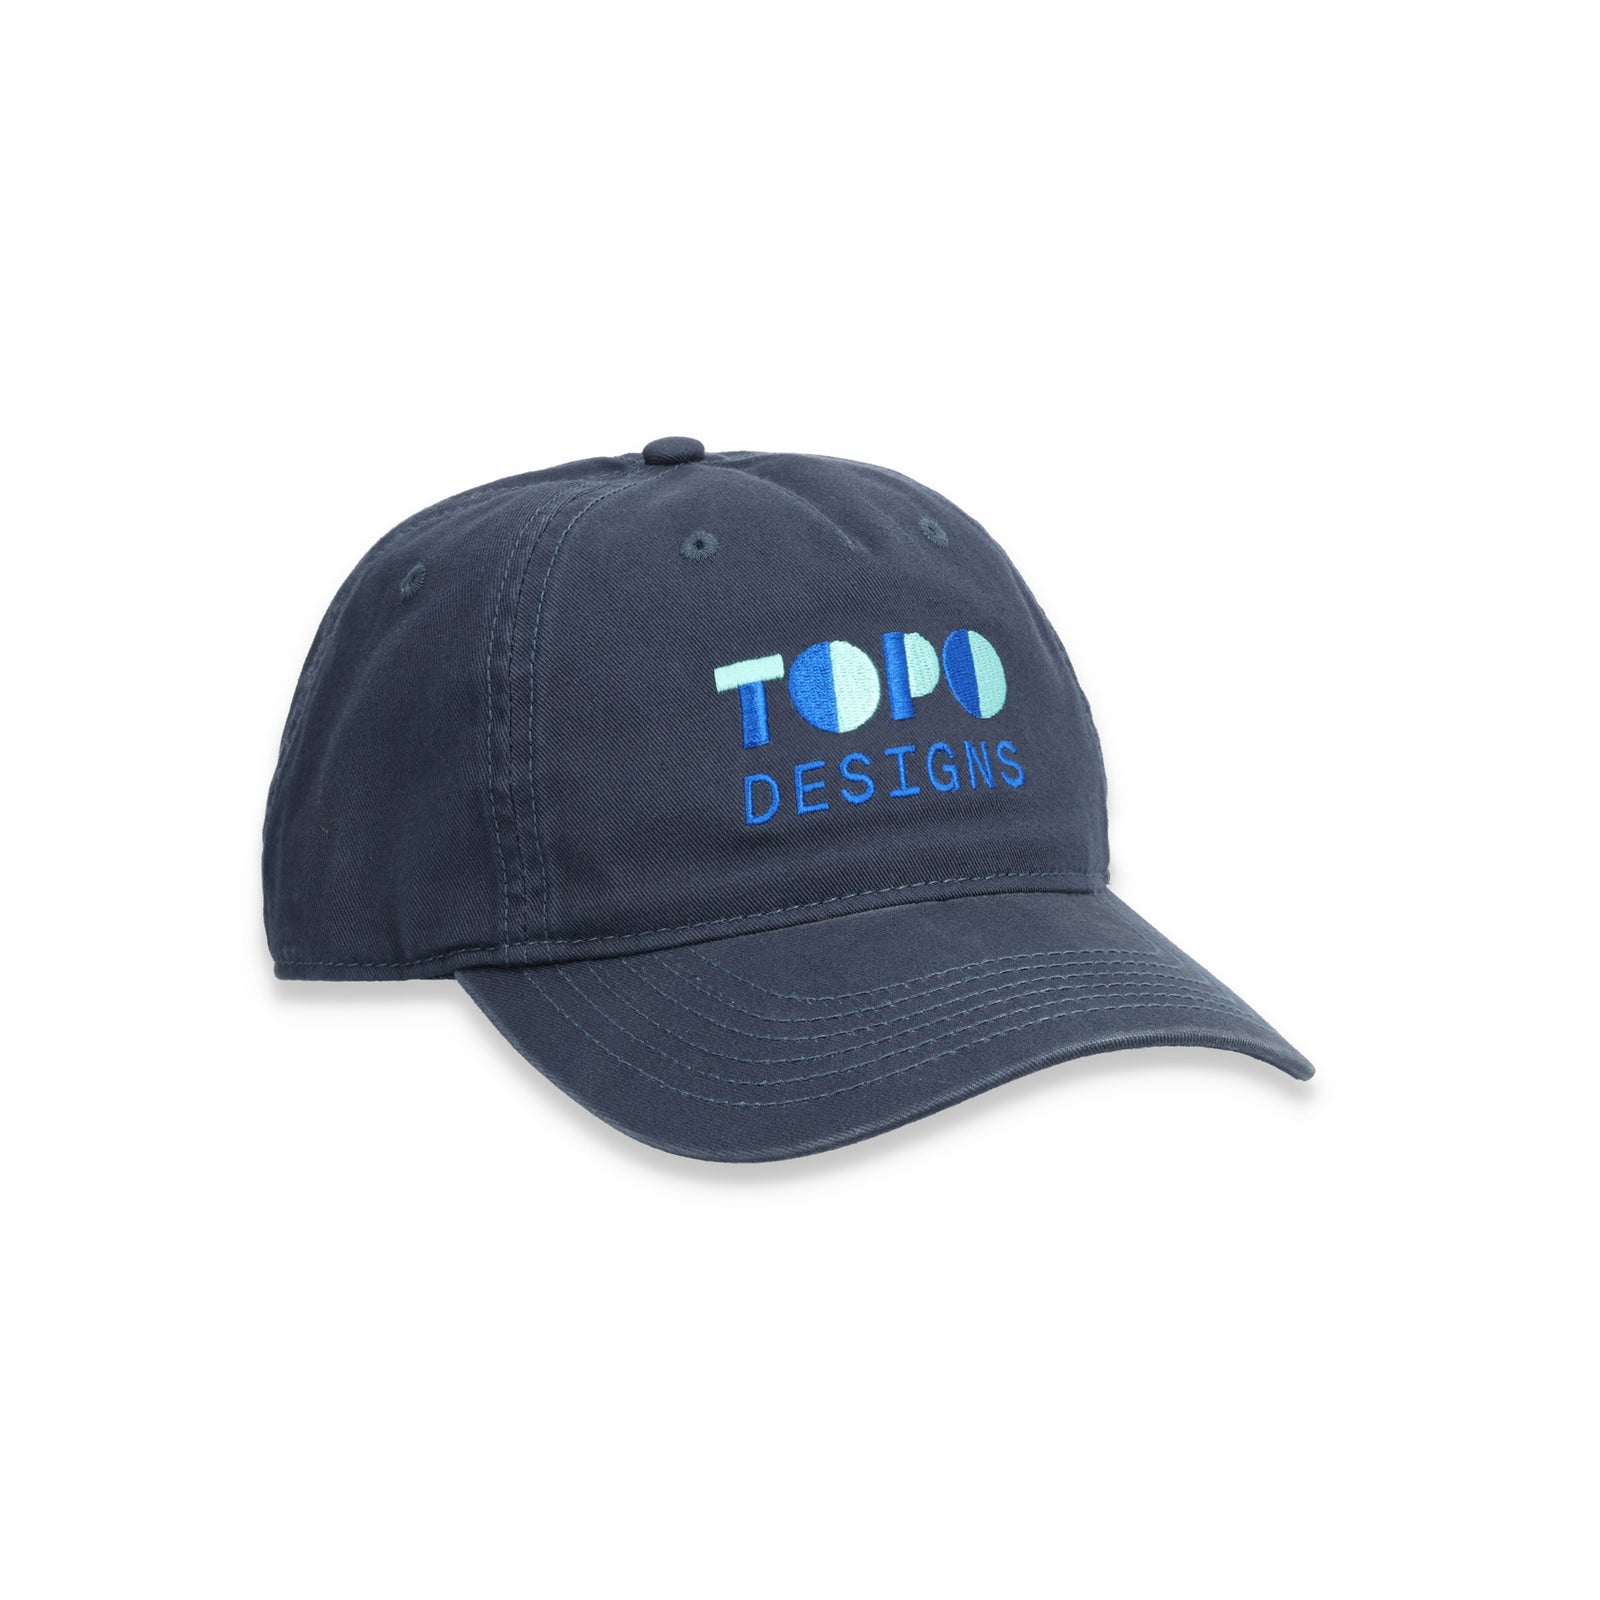 Topo Designs 5 Panel Snapback Hat, embroidered logo baseball cap in "Navy" blue.